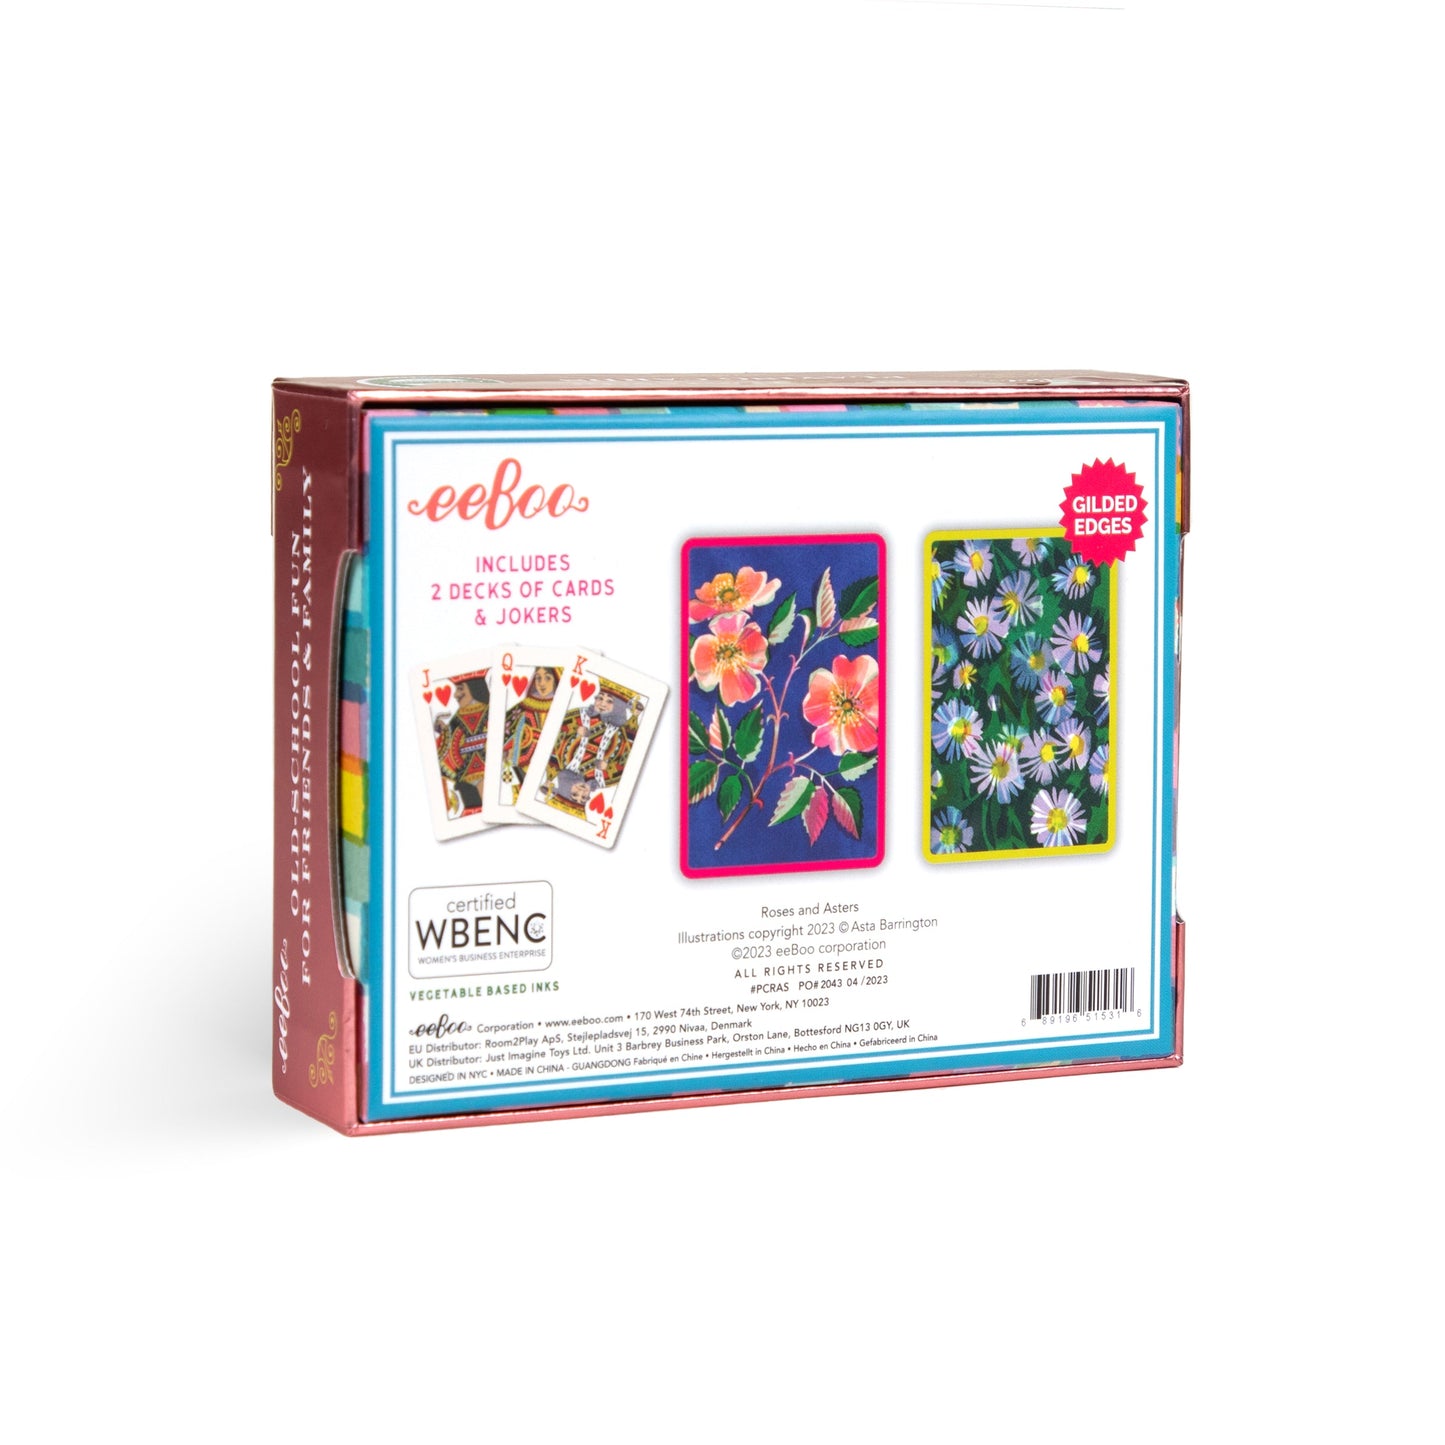  Roses & Asters Playing Cards | Unique Great Gifts for Kids & Adults 